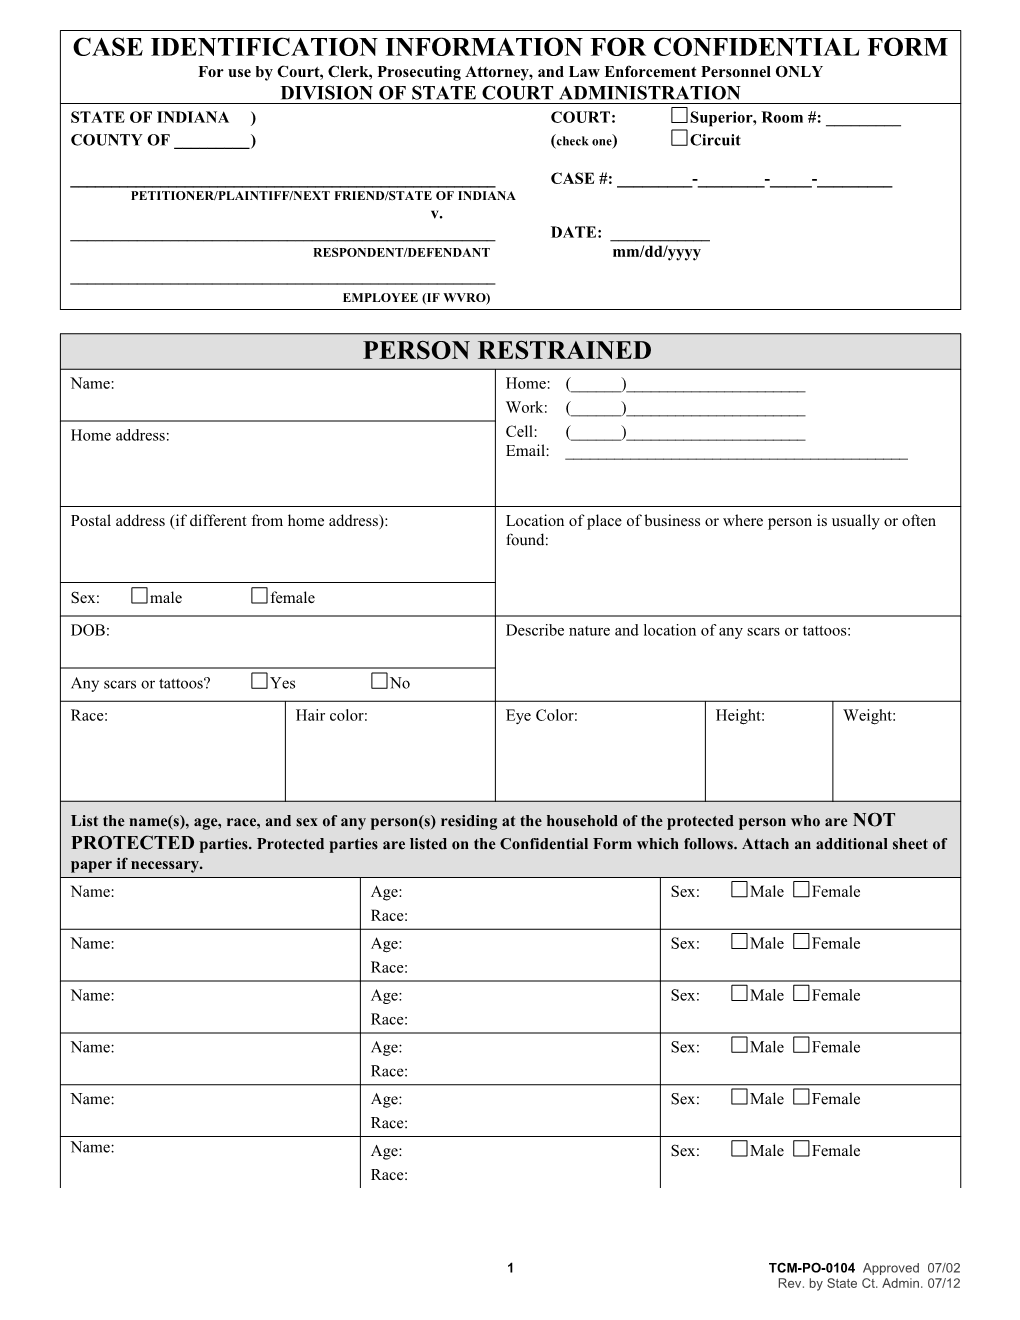 Case ID for Confidential Form & Confid Form